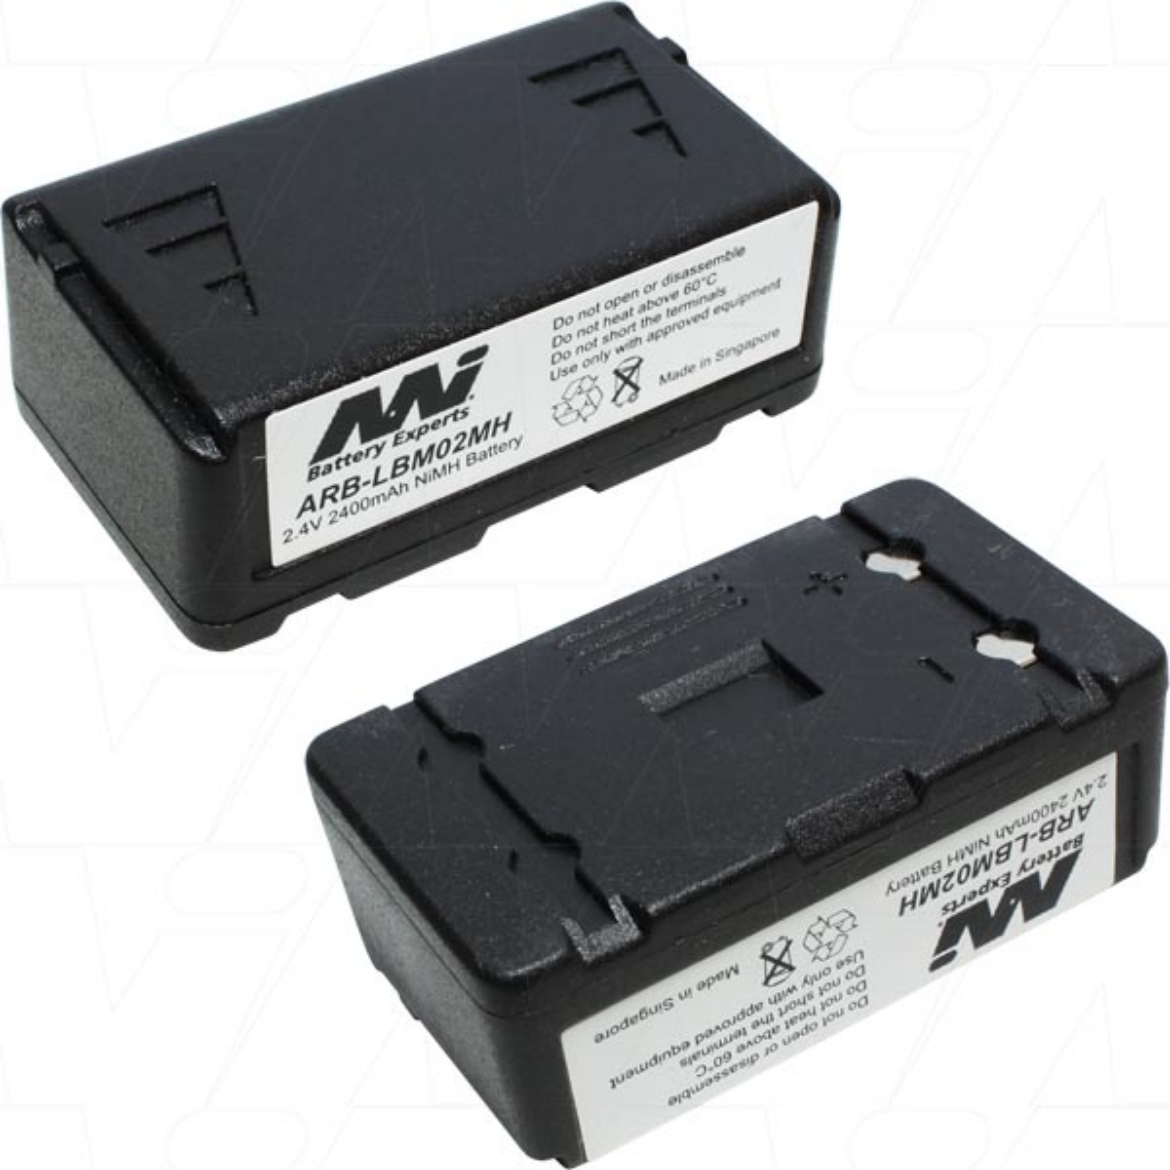 Picture of ARB-LBM02MH CRANE REMOTE BATTERY 2.4V 2.4AH 5.8Wh NIMH